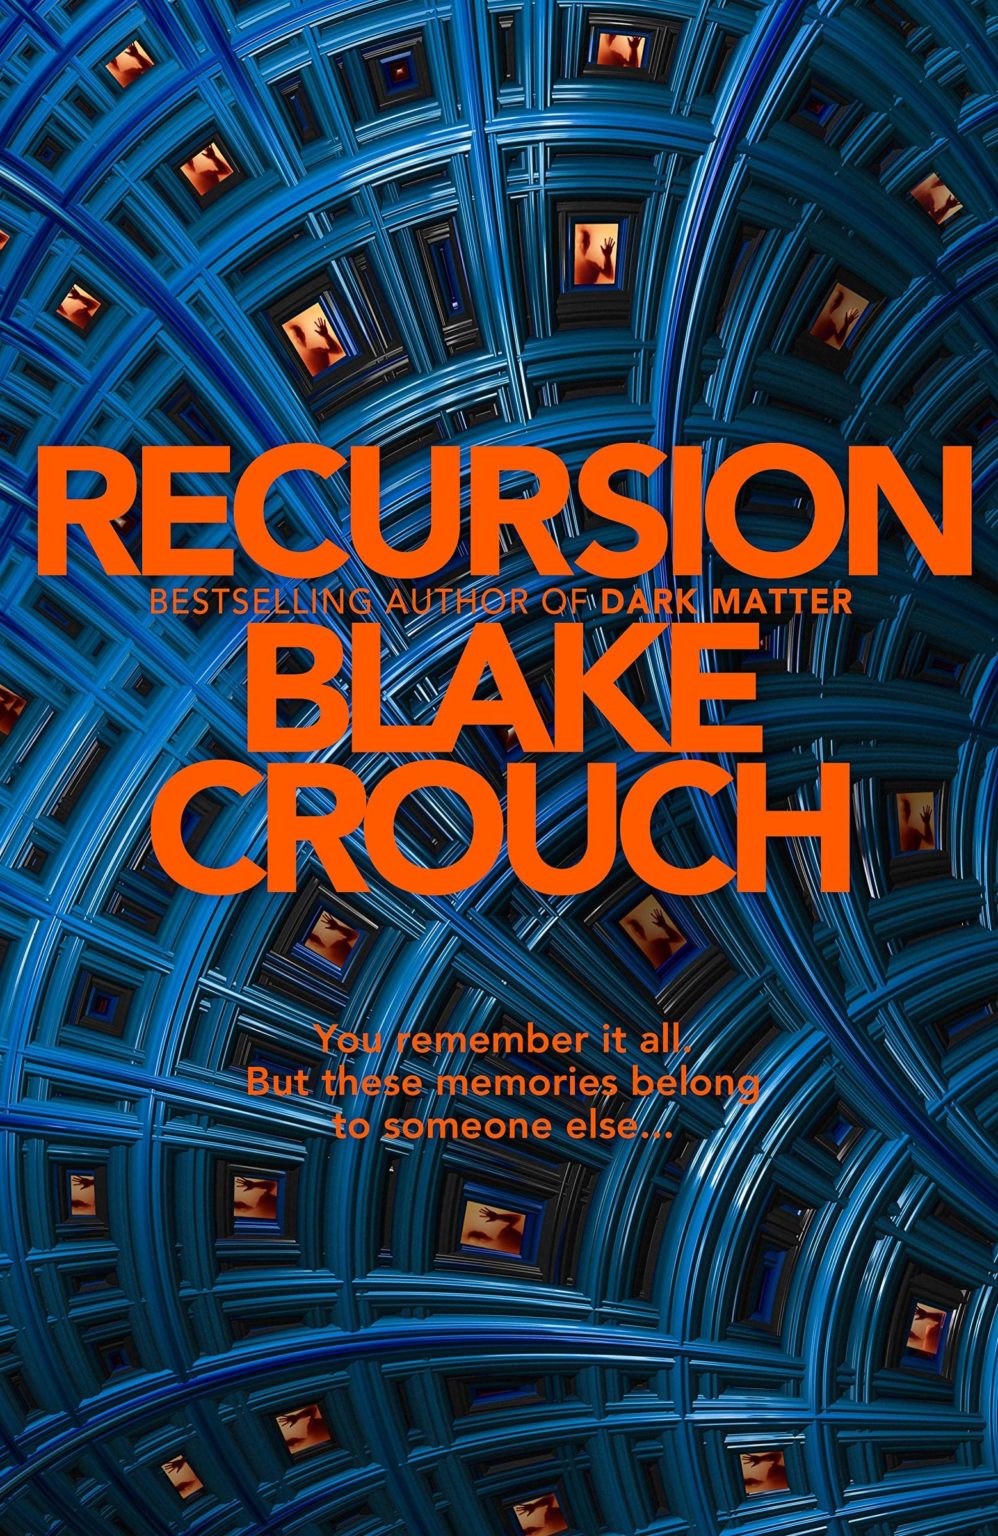 books by blake crouch